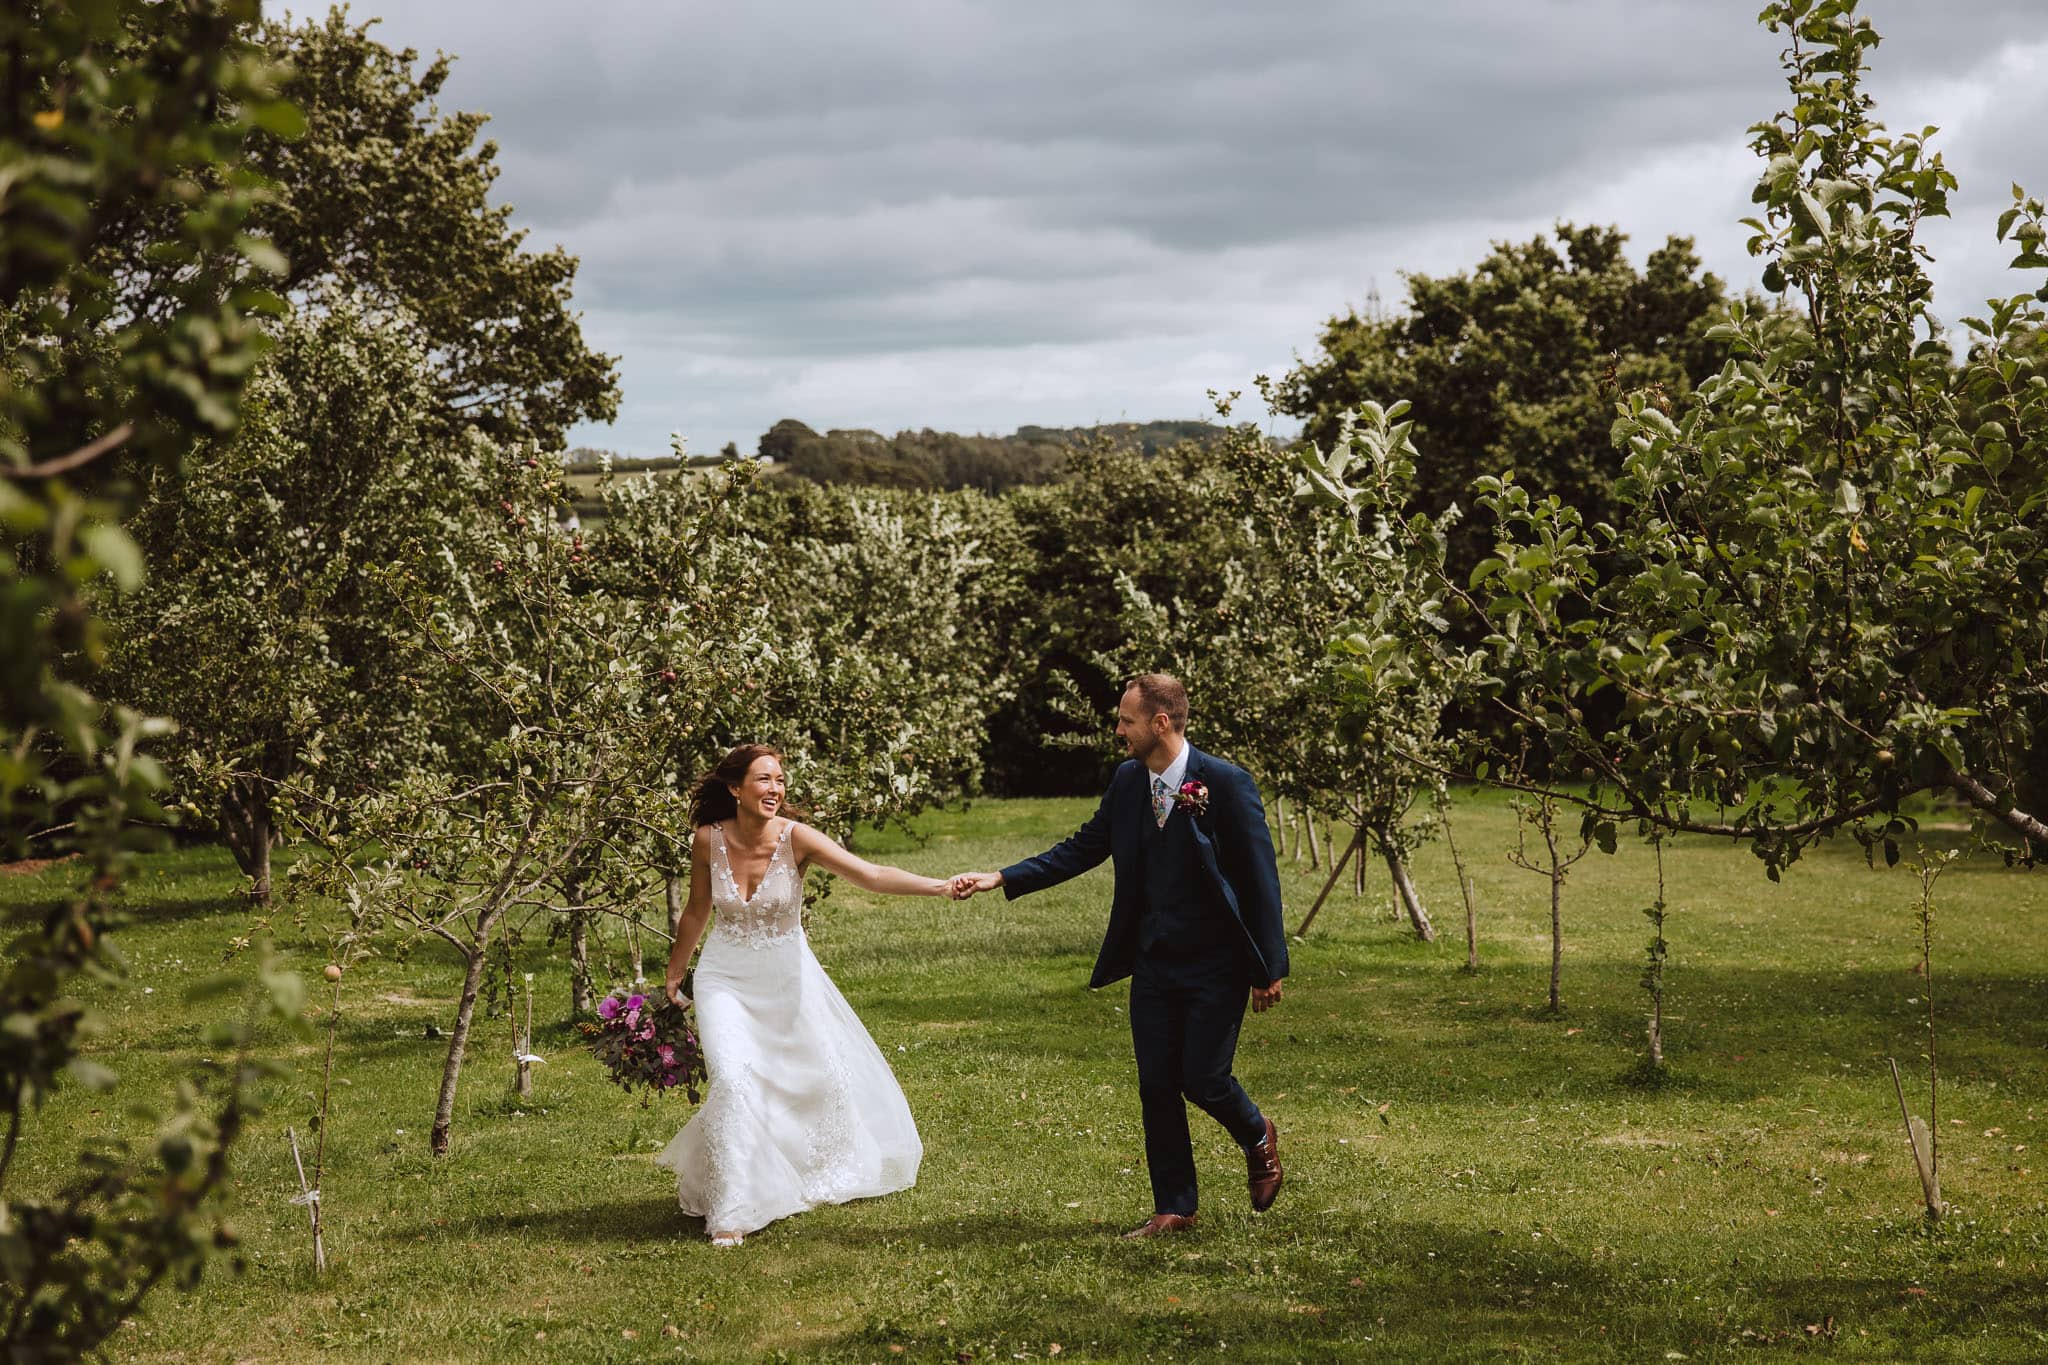 natural wedding portraits in the apple orchard at Anran boutique wedding venue